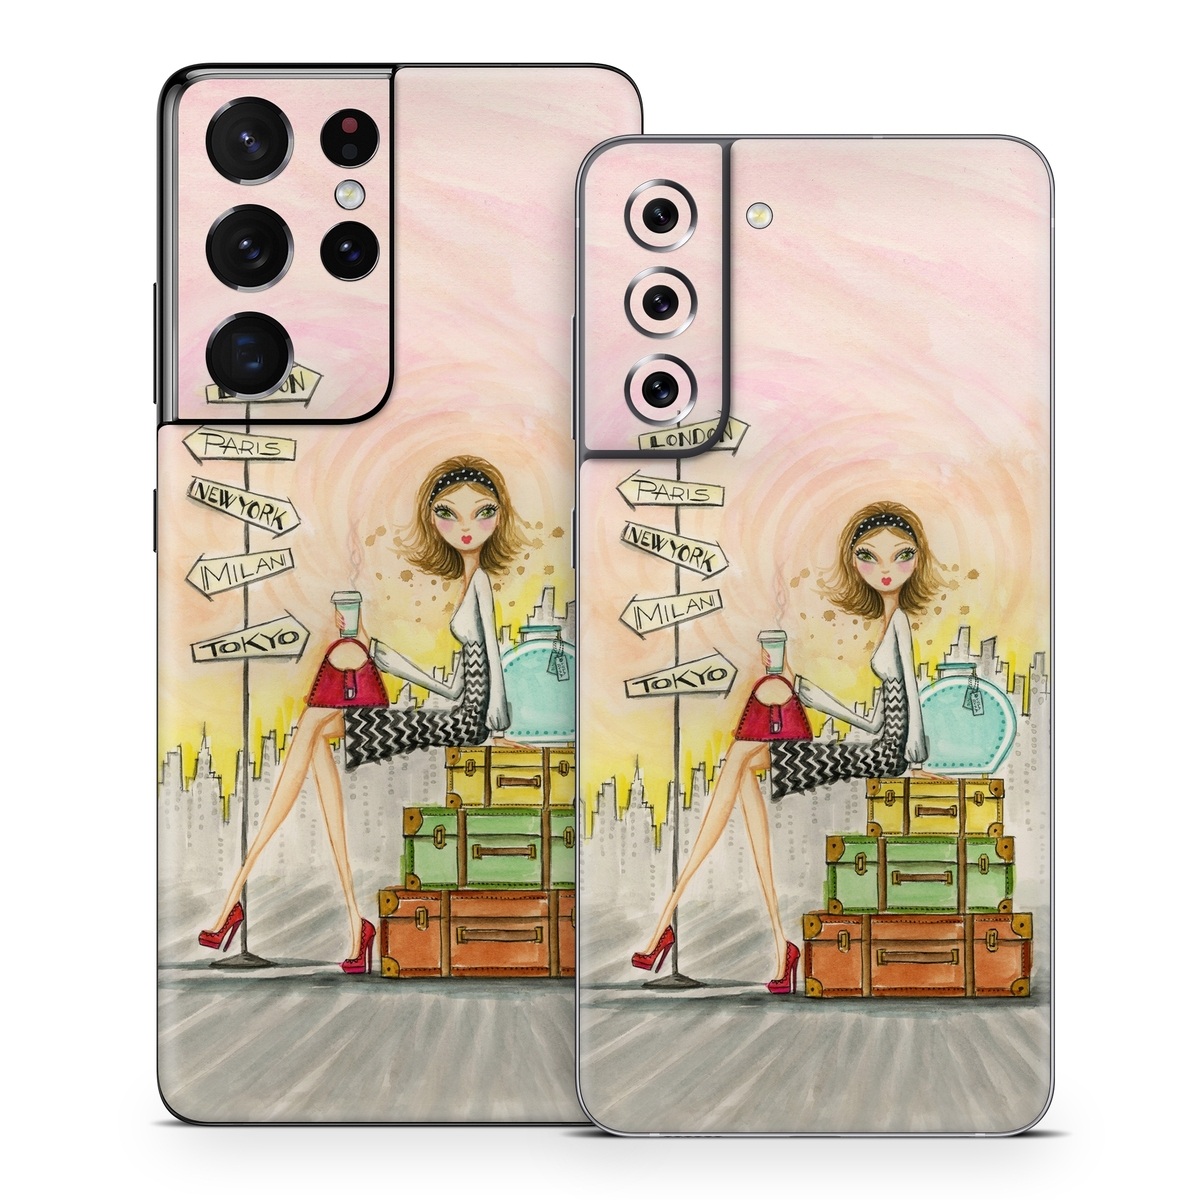 Samsung Galaxy S21 Series Skin design of Cartoon, Illustration, Art, Watercolor paint, with gray, pink, green, red, black colors